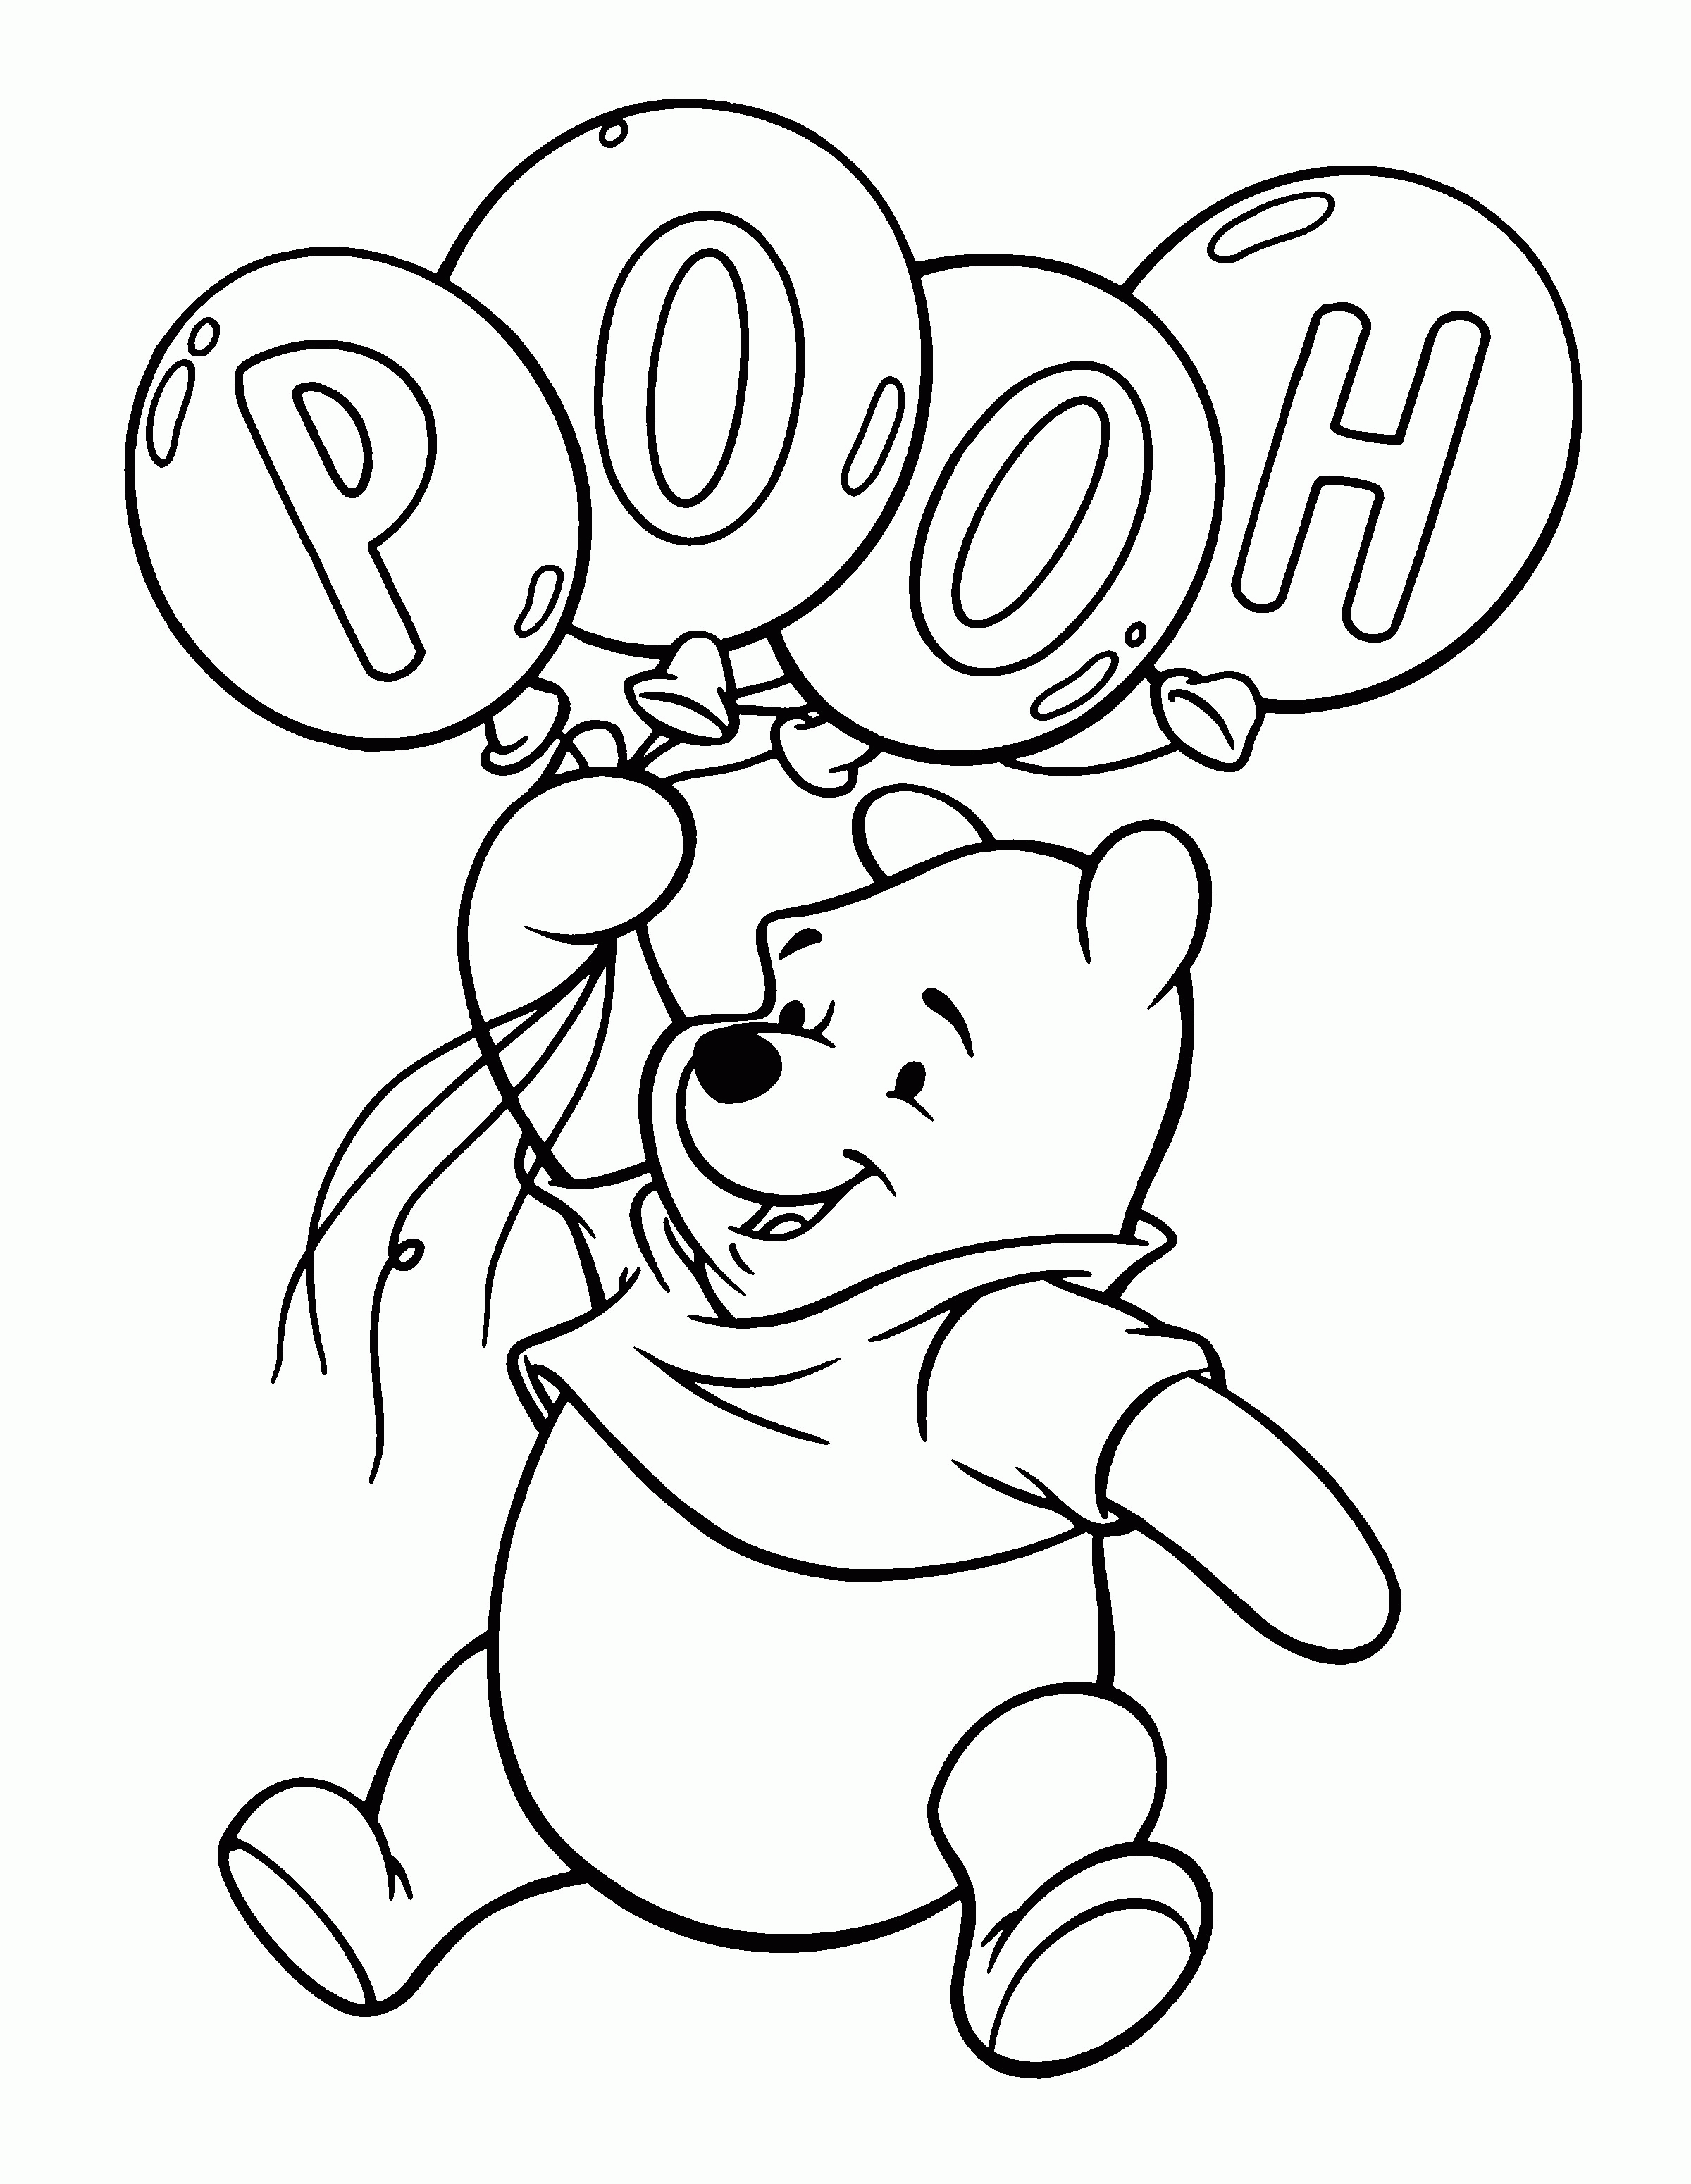 classic winnie the pooh coloring pages | Best Coloring Page Site